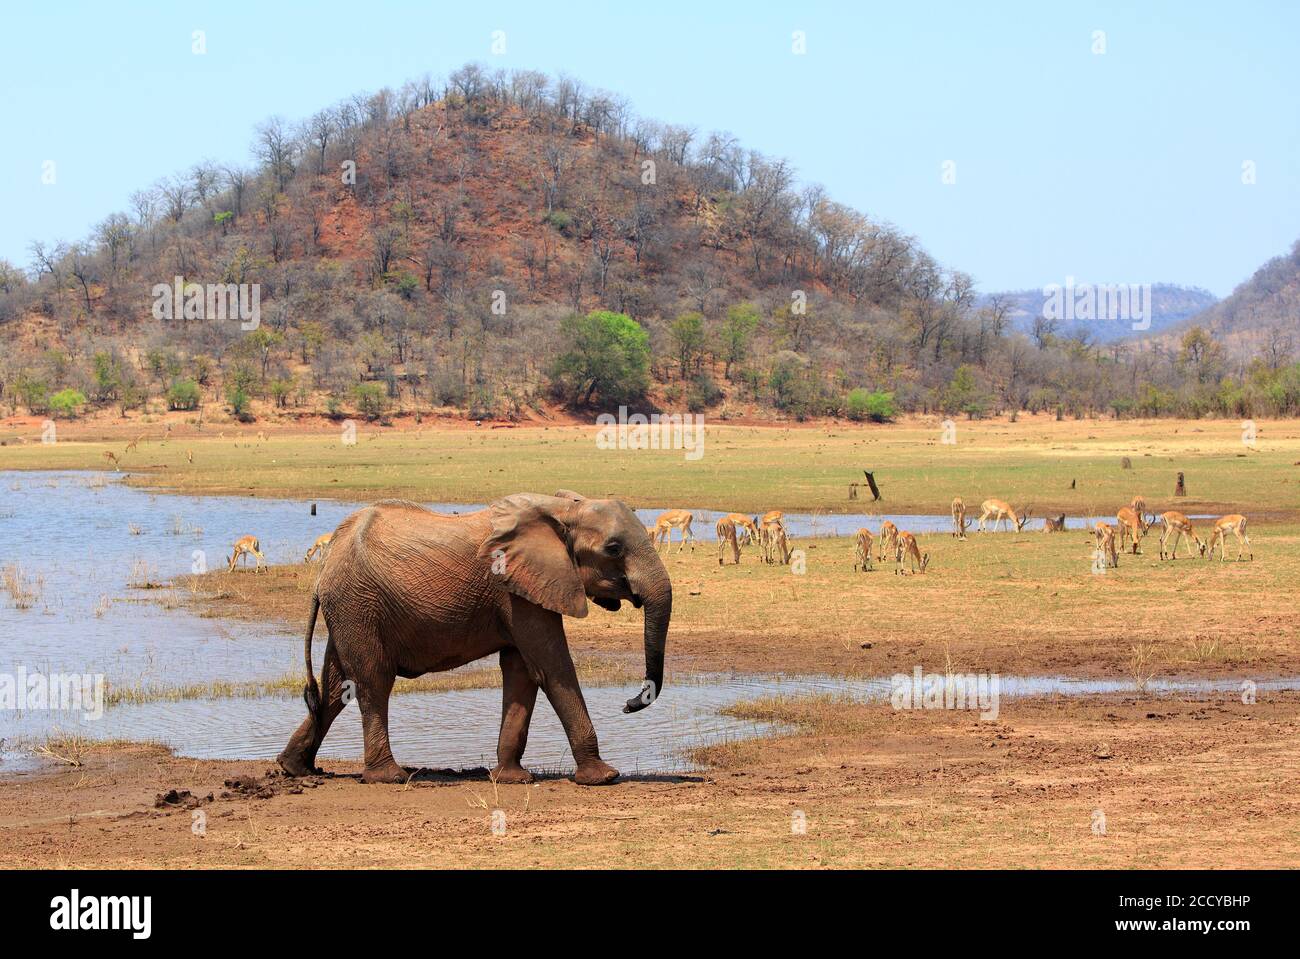 African Elephant on the shireline of Lake Kariba, with a lush green hill and impala grazing in the grss in the background.  Matusadona National Park, Stock Photo